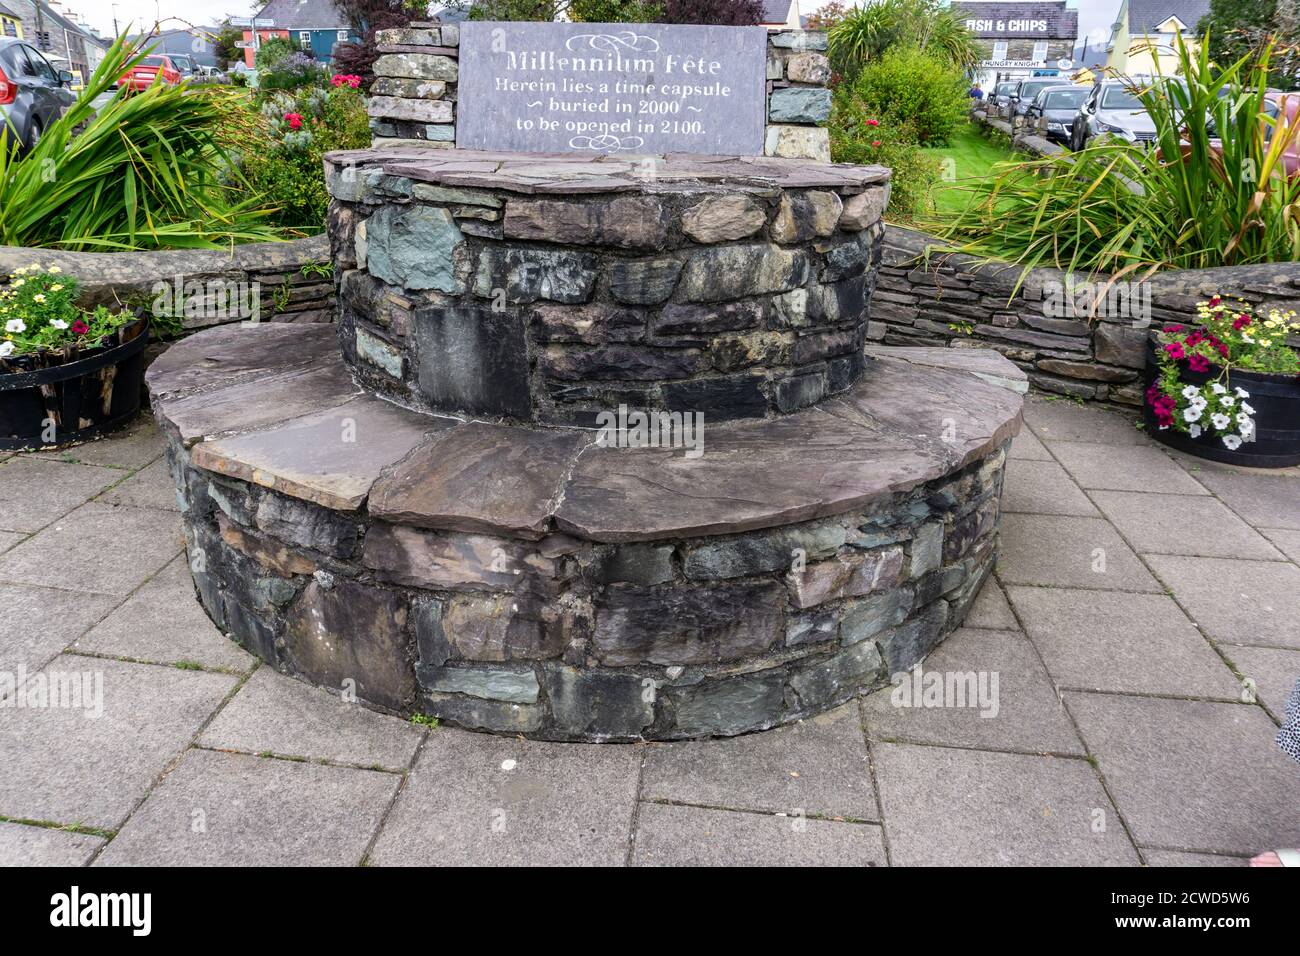 In Sneem, County Kerry, Ireland, a time capsule buried in the year 2000, to be opened in the year 2100. Stock Photo